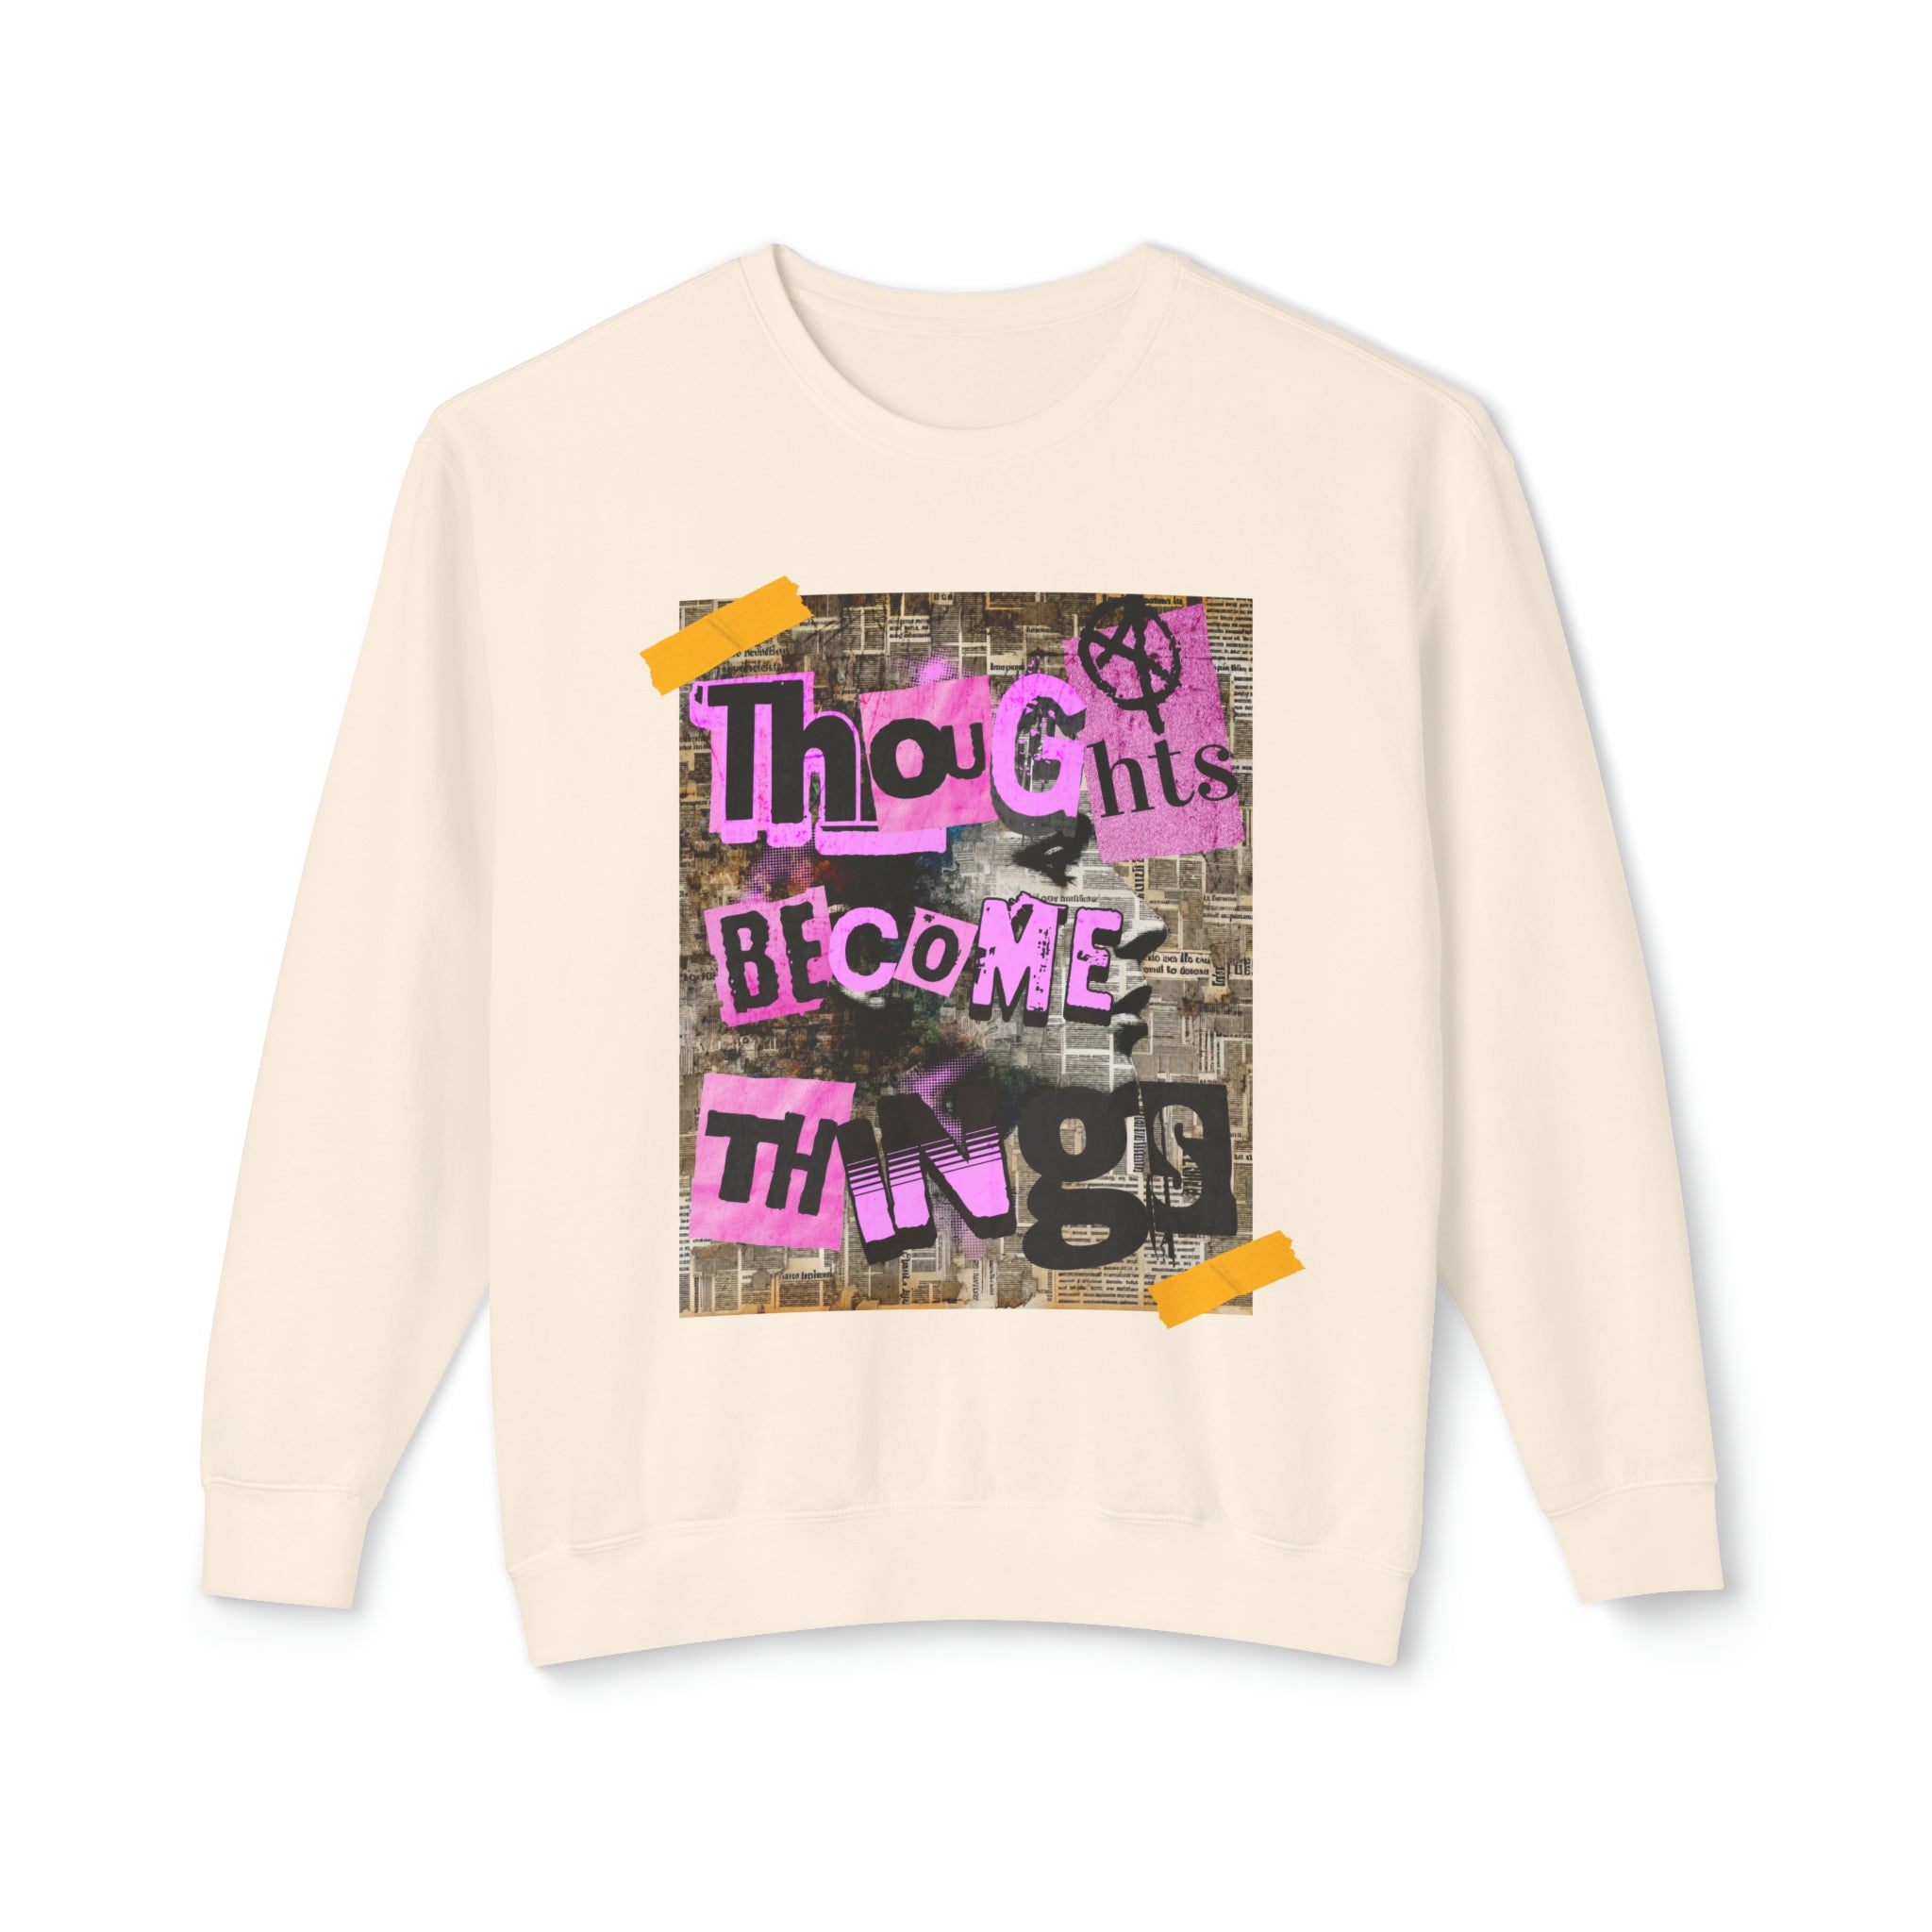 GOLDxTEAL's exclusive Thoughts Become Things Sweatshirt.